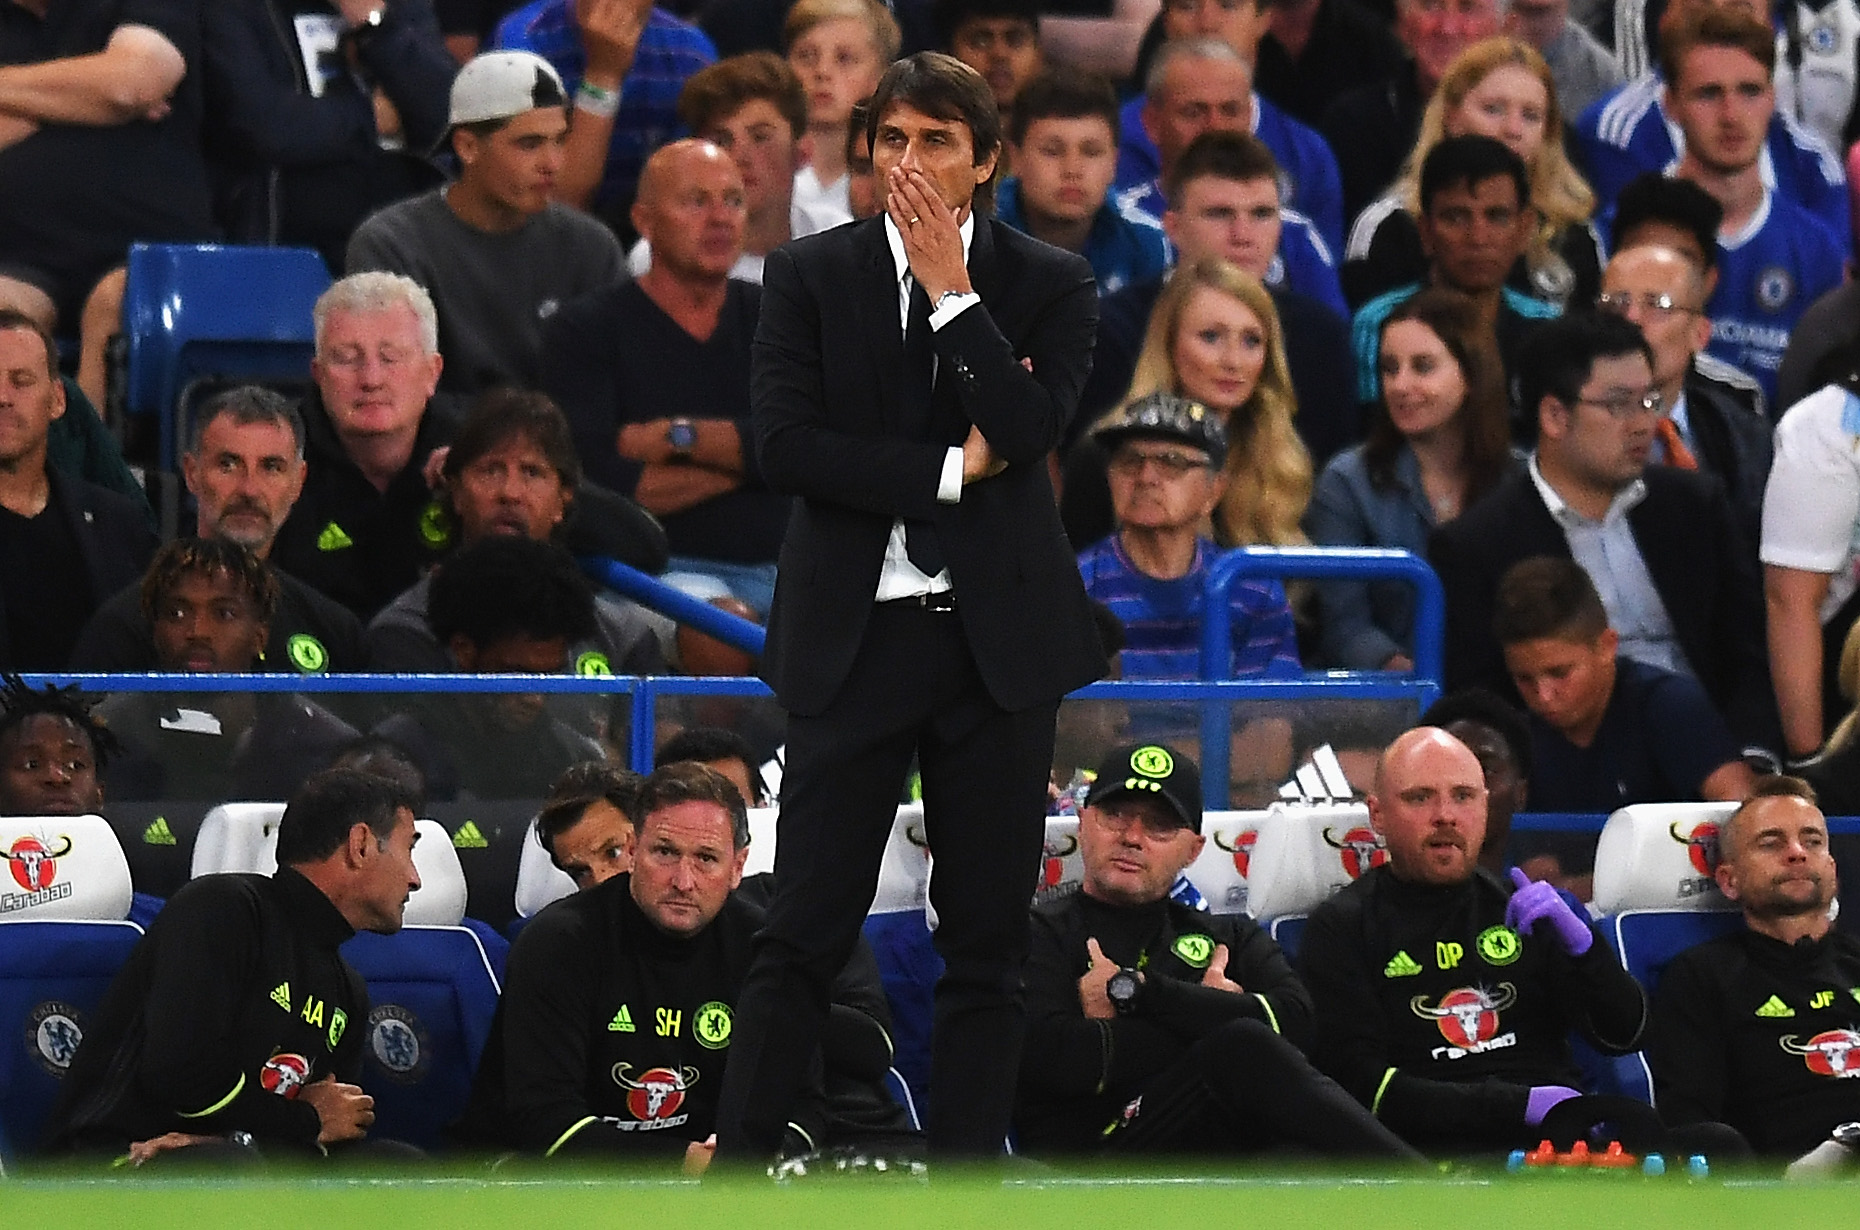 LONDON, ENGLAND - AUGUST 15: Antonio Conte, Manager of Chelsea looks on during the Premier League match between Chelsea and West Ham United at Stamford Bridge on August 15, 2016 in London, England. (Photo by Mike Hewitt/Getty Images)